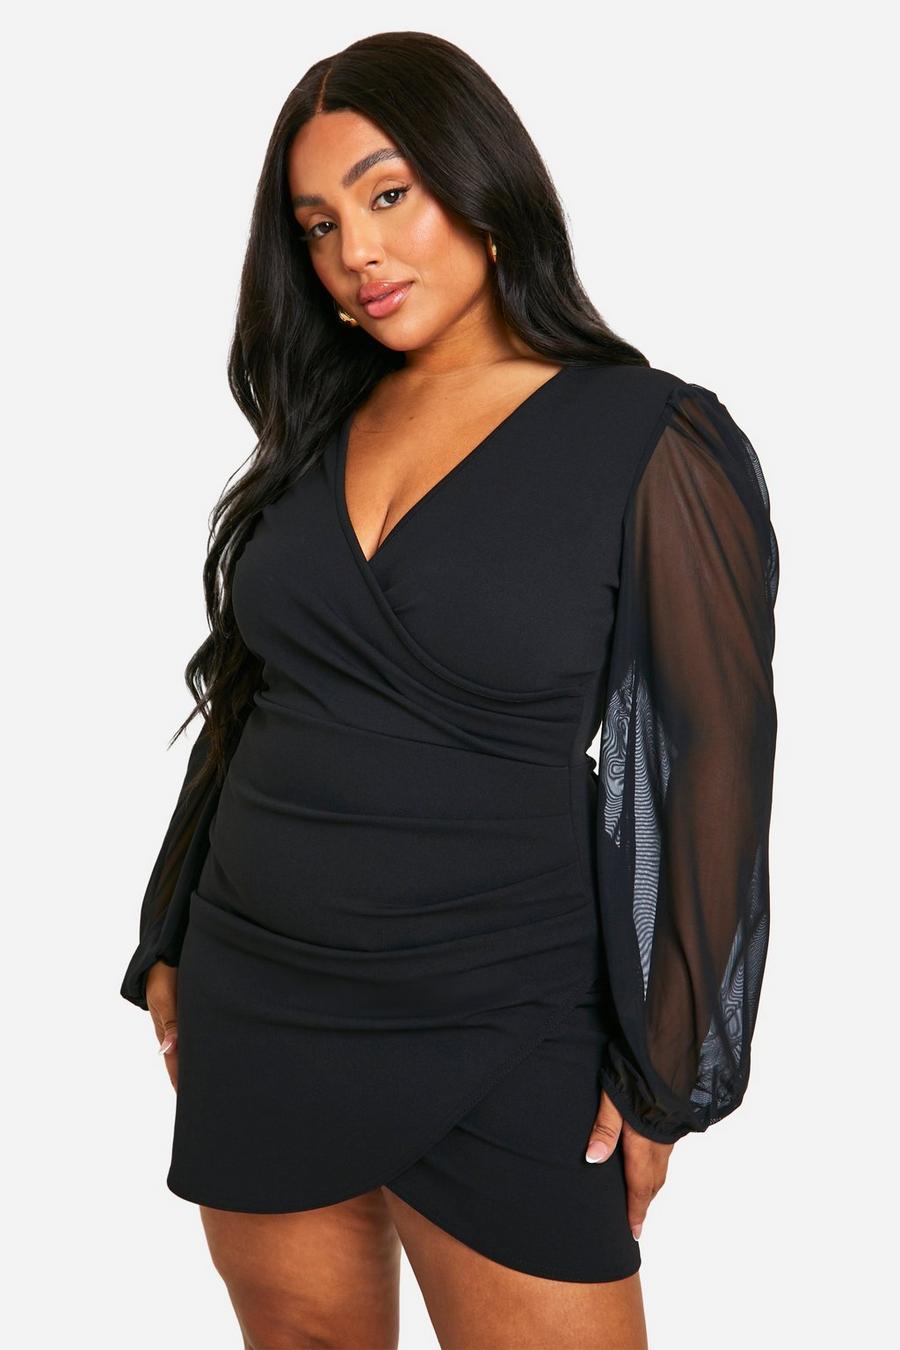 Curvy Plus Size Going Out Outfits